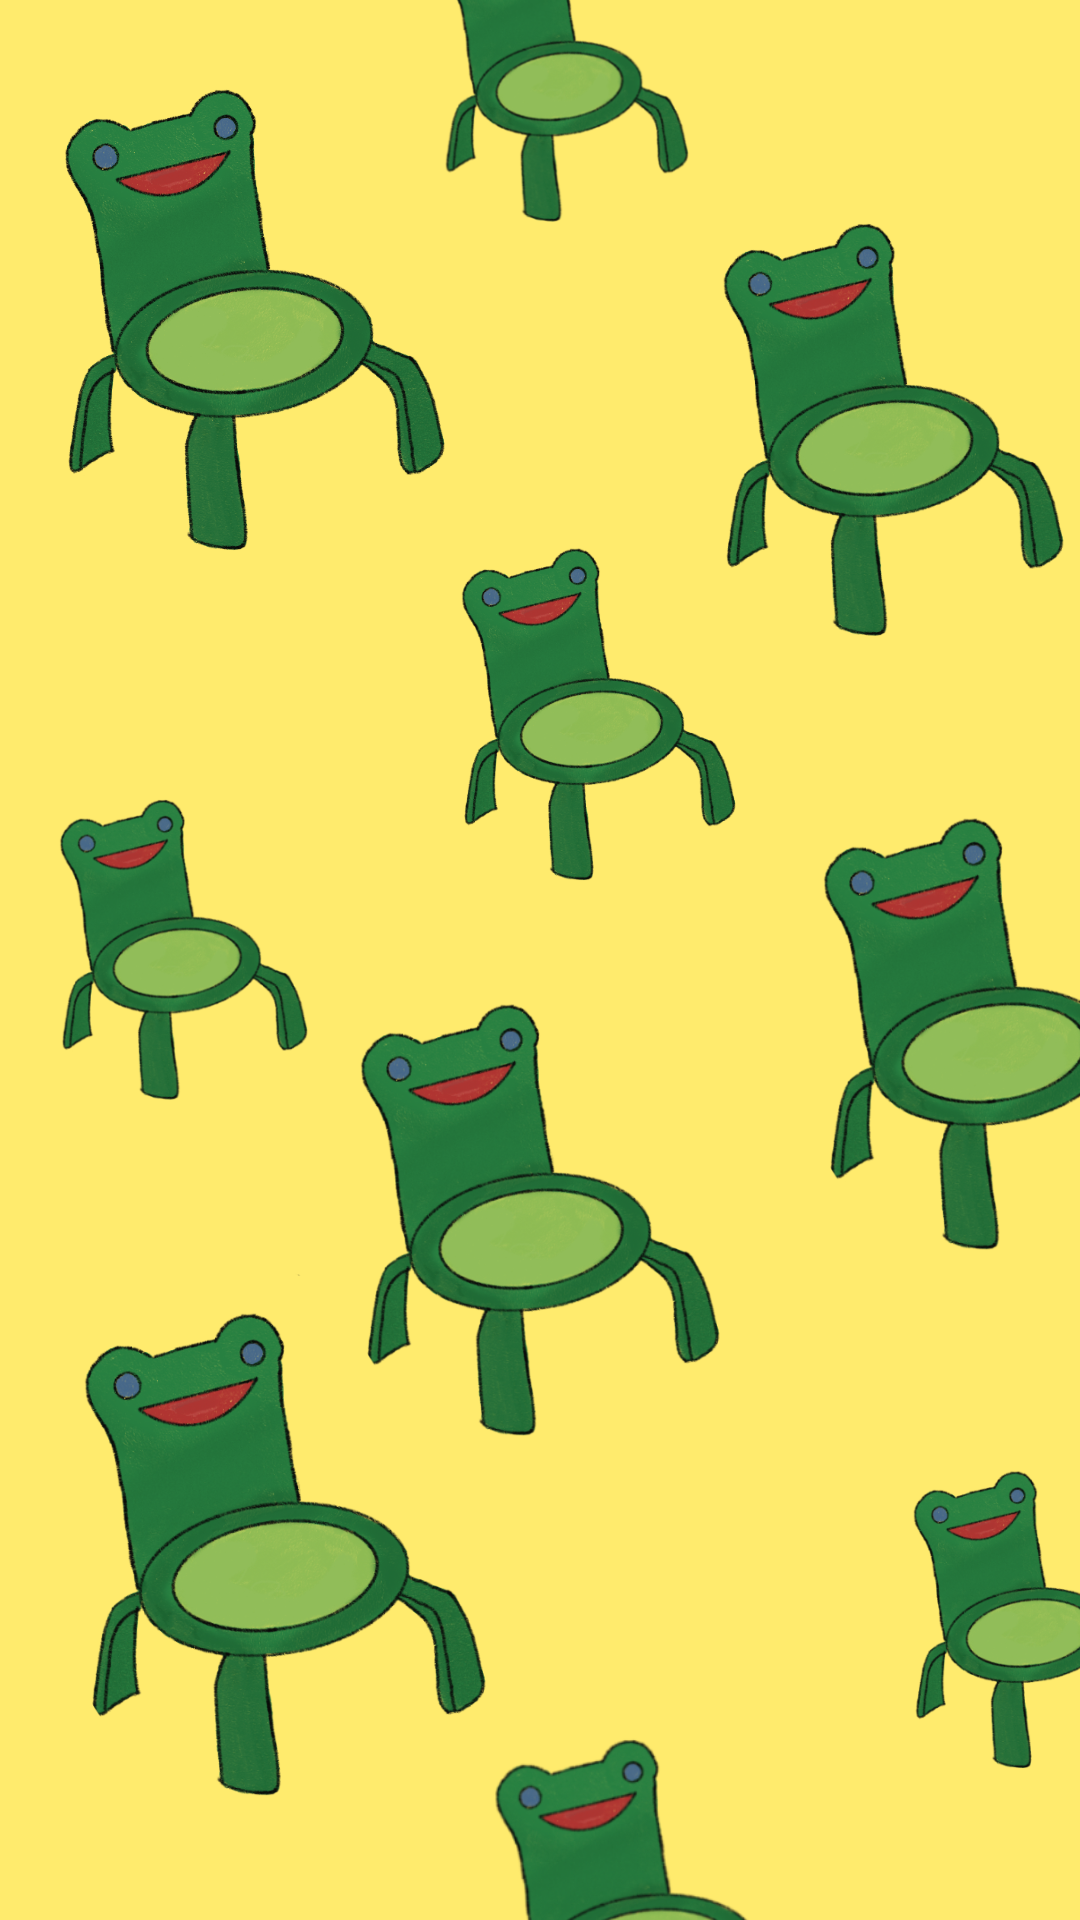 Froggy chair wallpaper. Frog wallpaper, Animal crossing, Animal crossing 3Ds